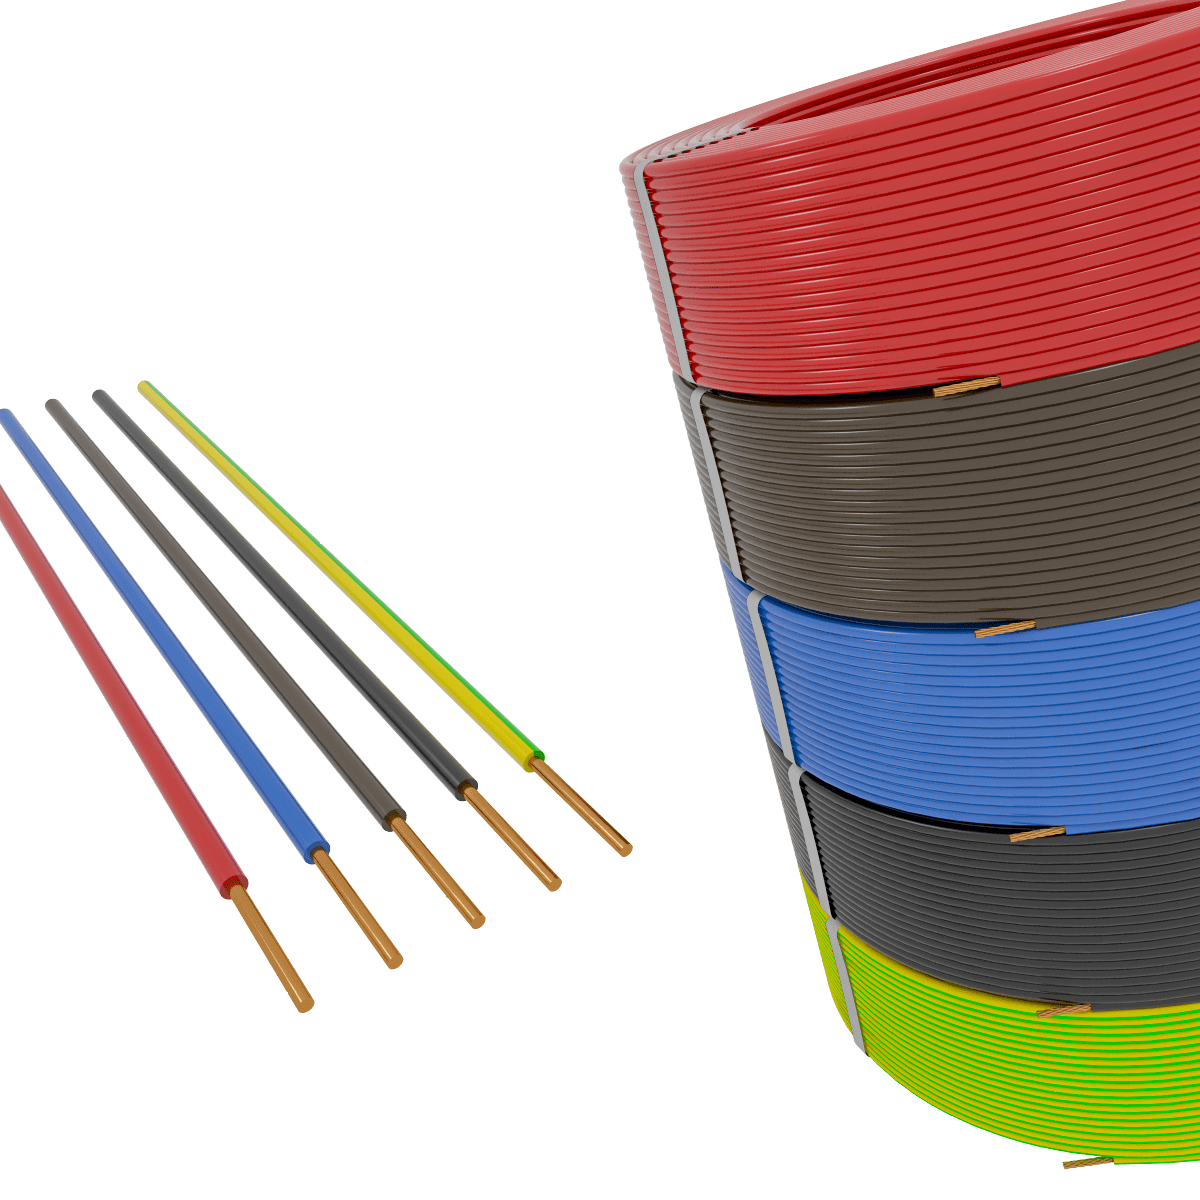 6 mm² Insulated Cables